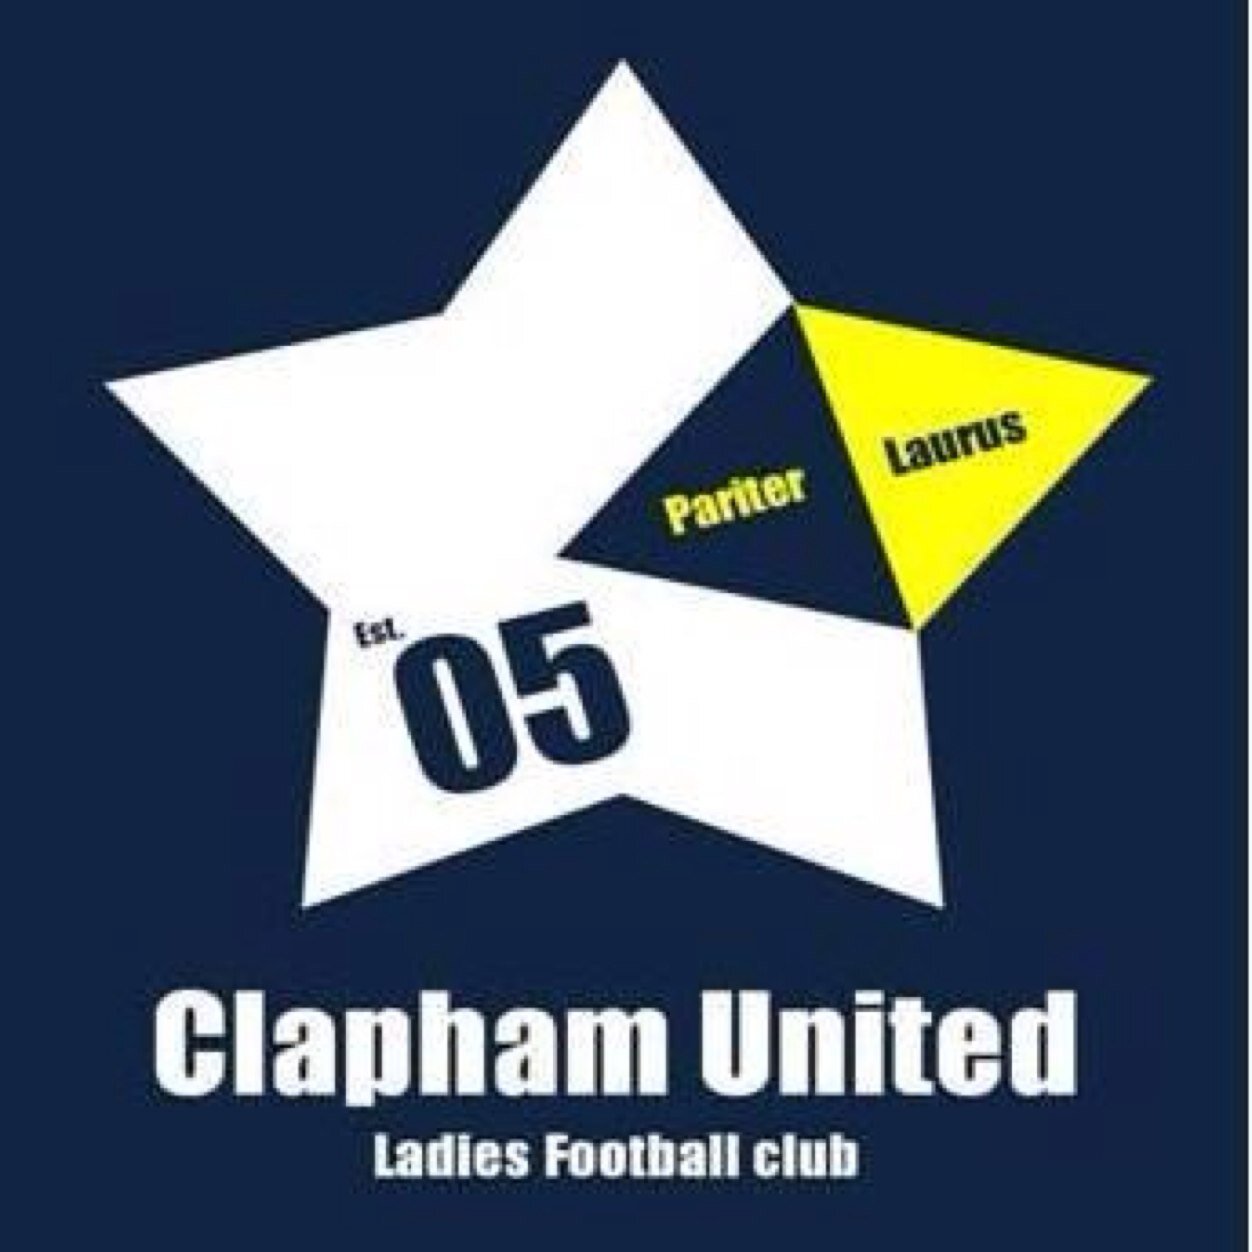 Official twitter page for Clapham United WFC. Two teams playing in the Greater London Women's Football League (Premier Division & Division 2 North) ⚽